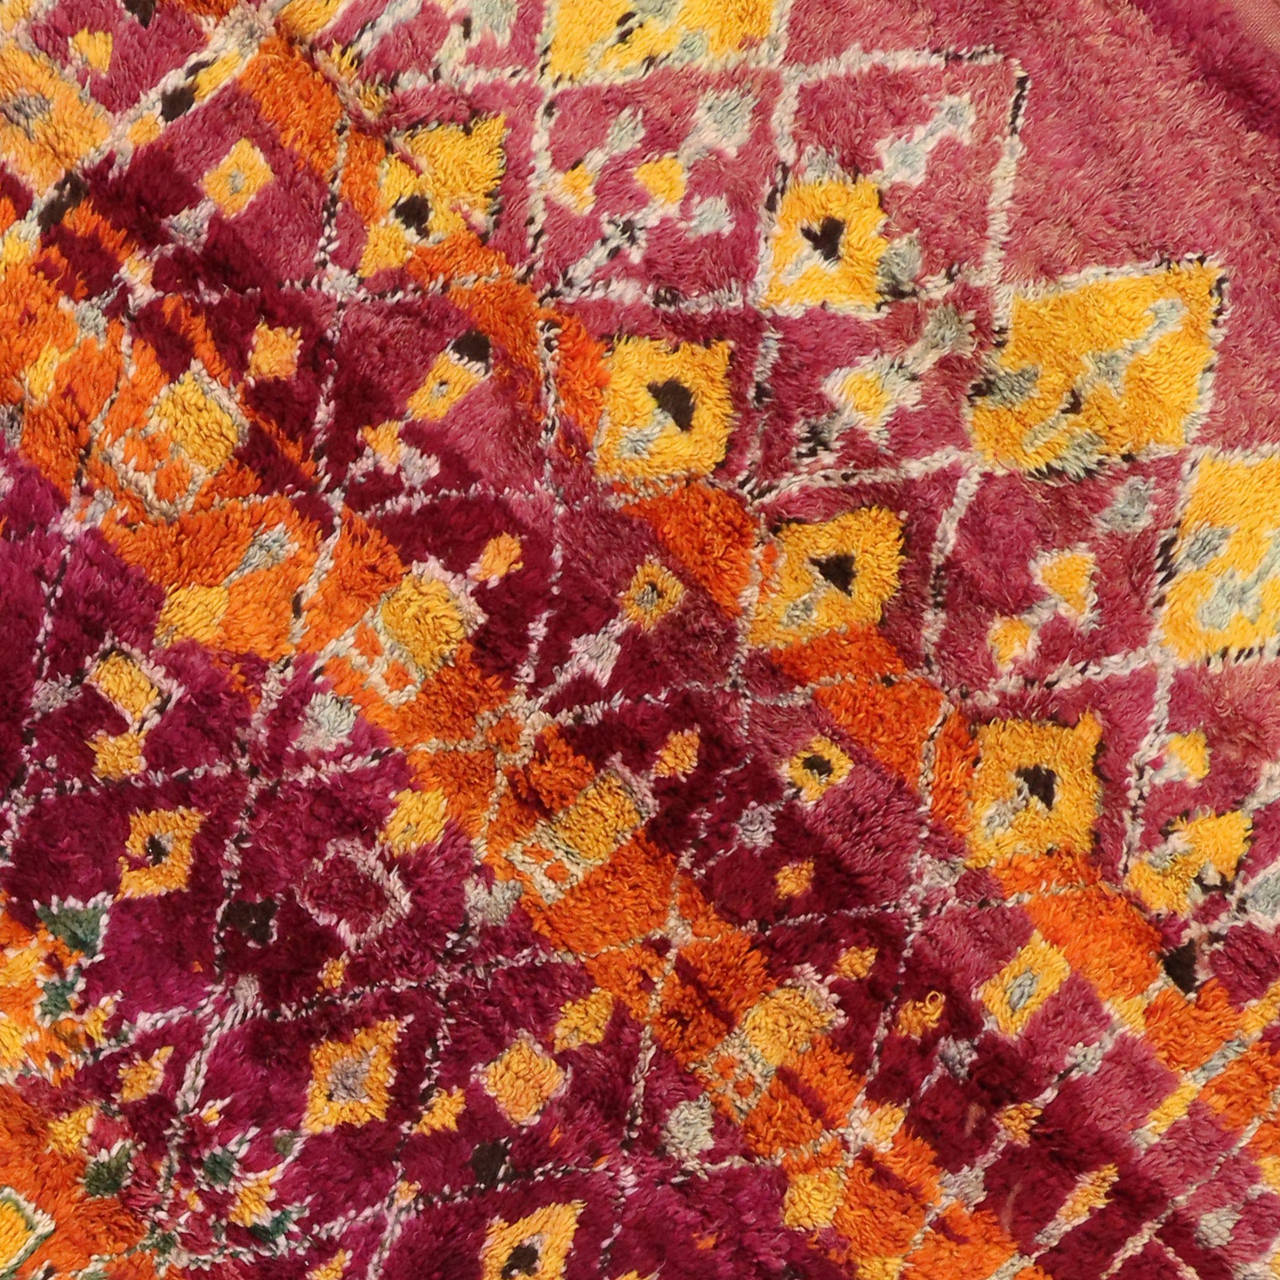 Vintage Moroccan Rug with Indian Summer Colors, 06'10